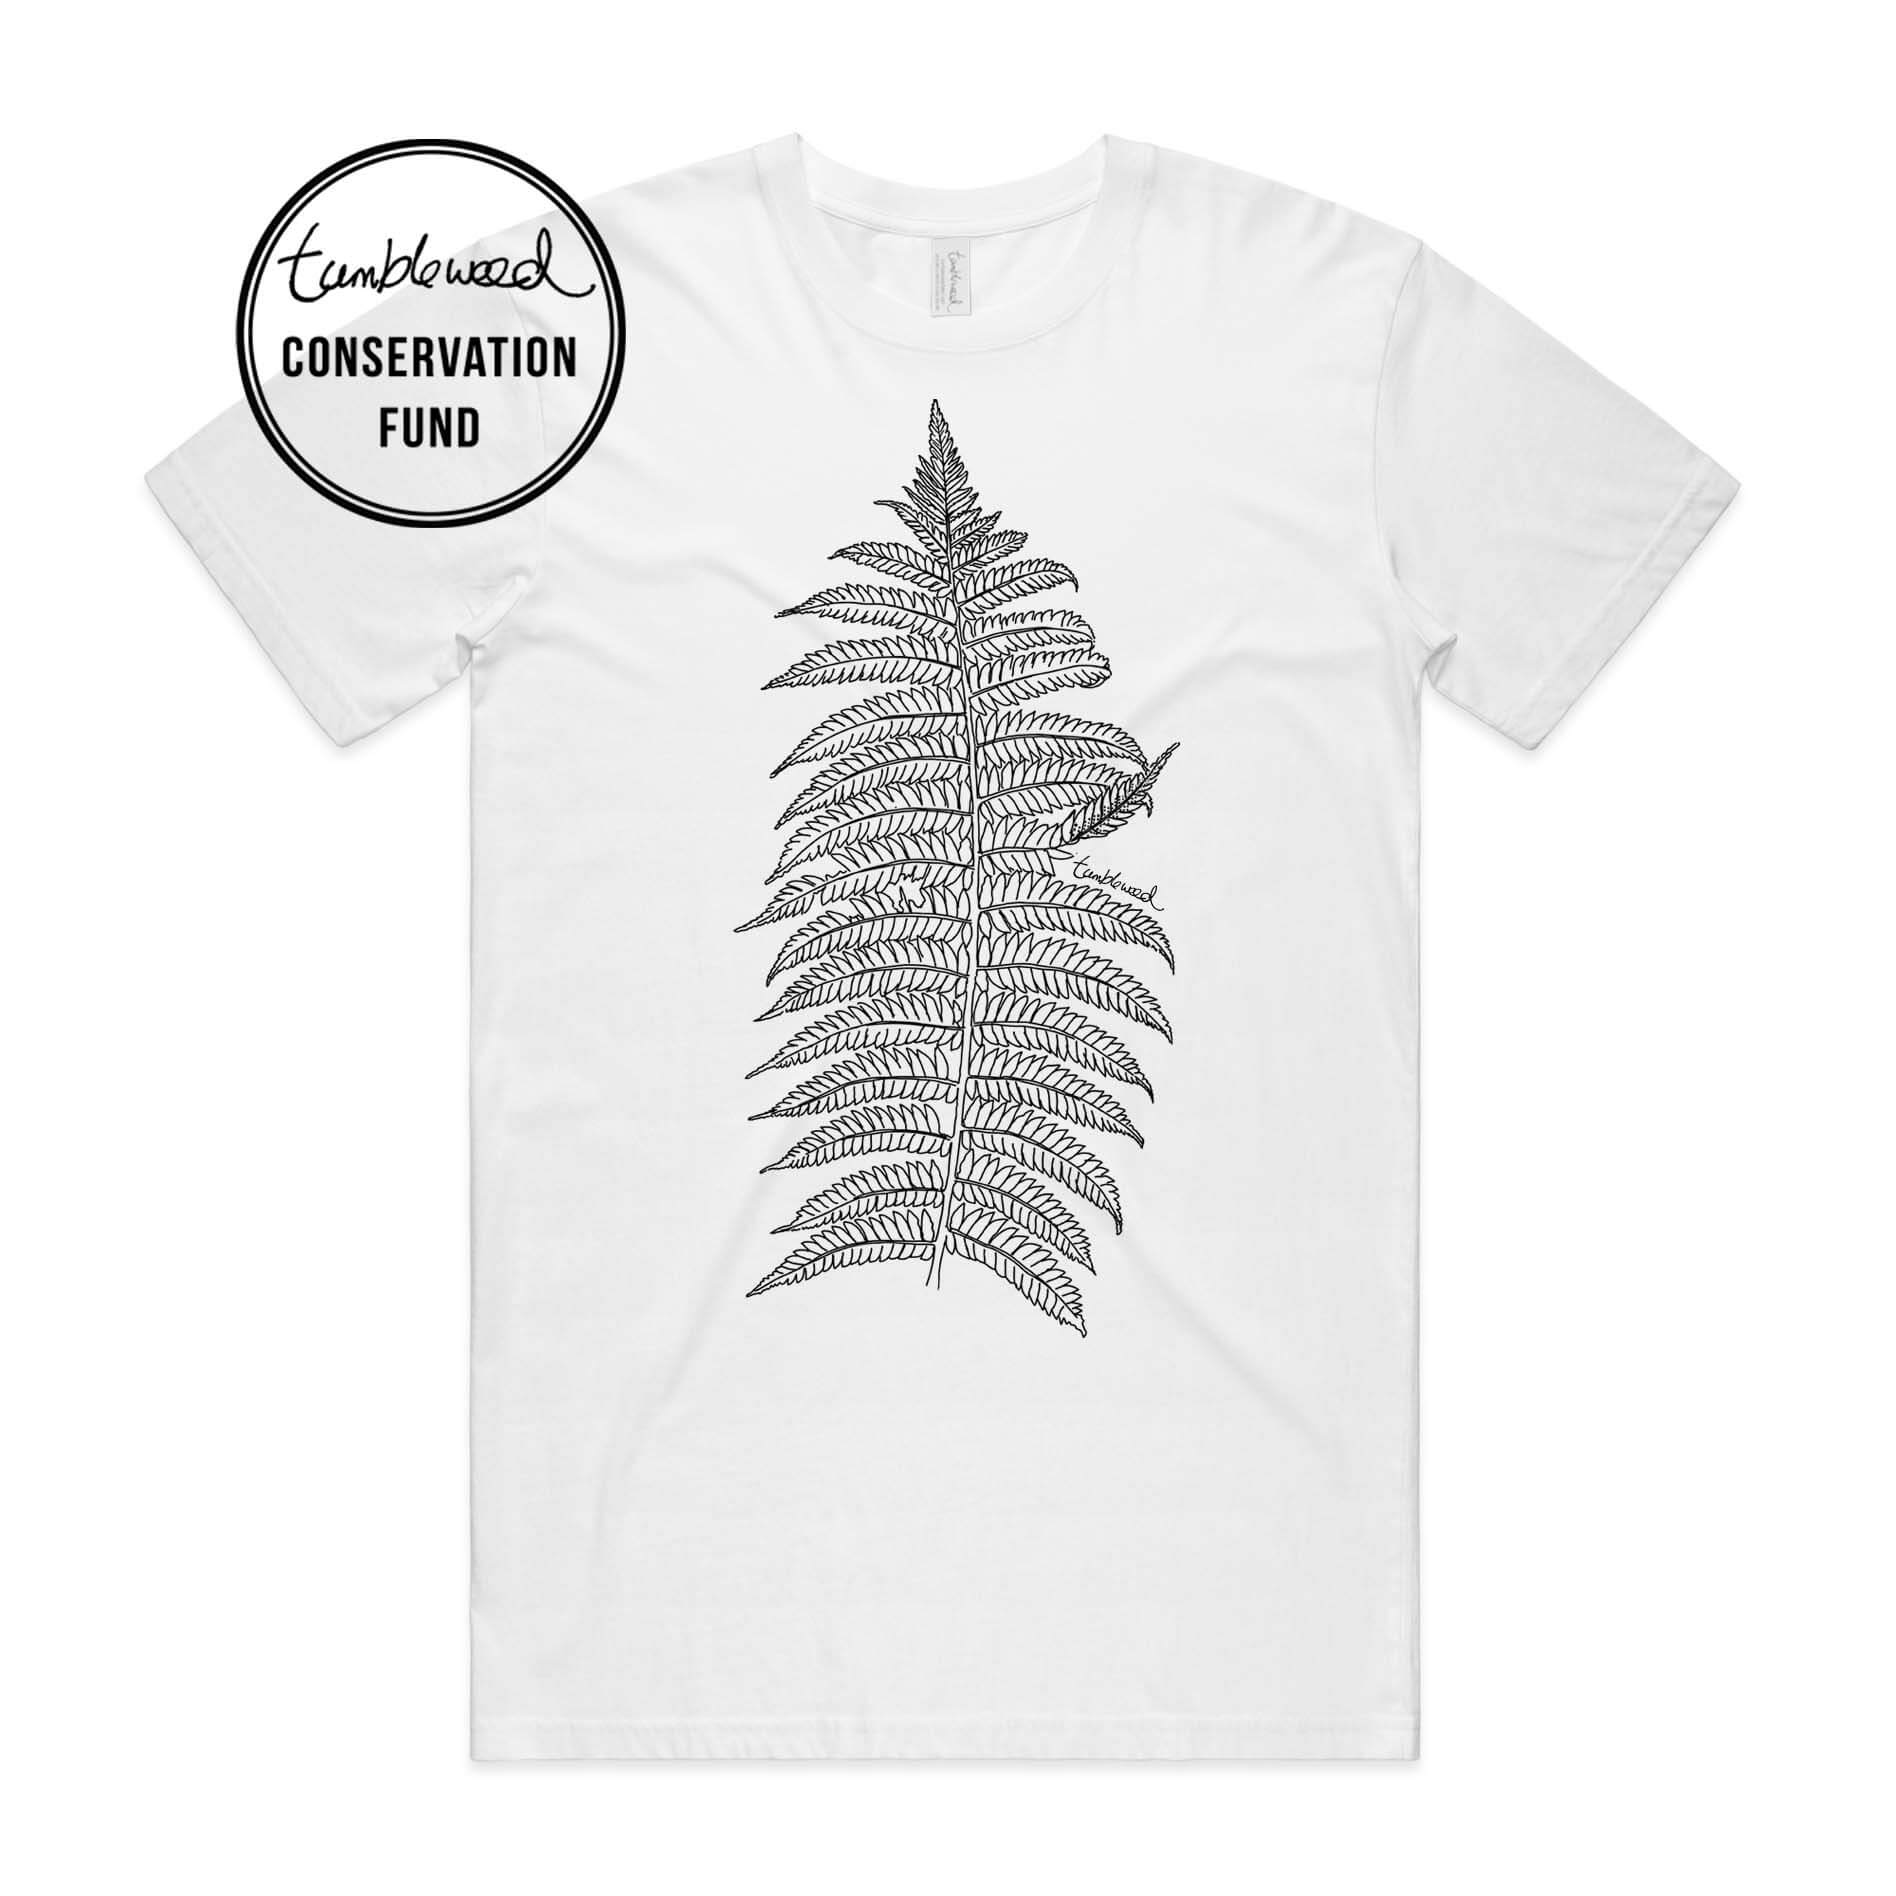 Grey marle, male t-shirt featuring a screen printed Silver fern/ponga design.